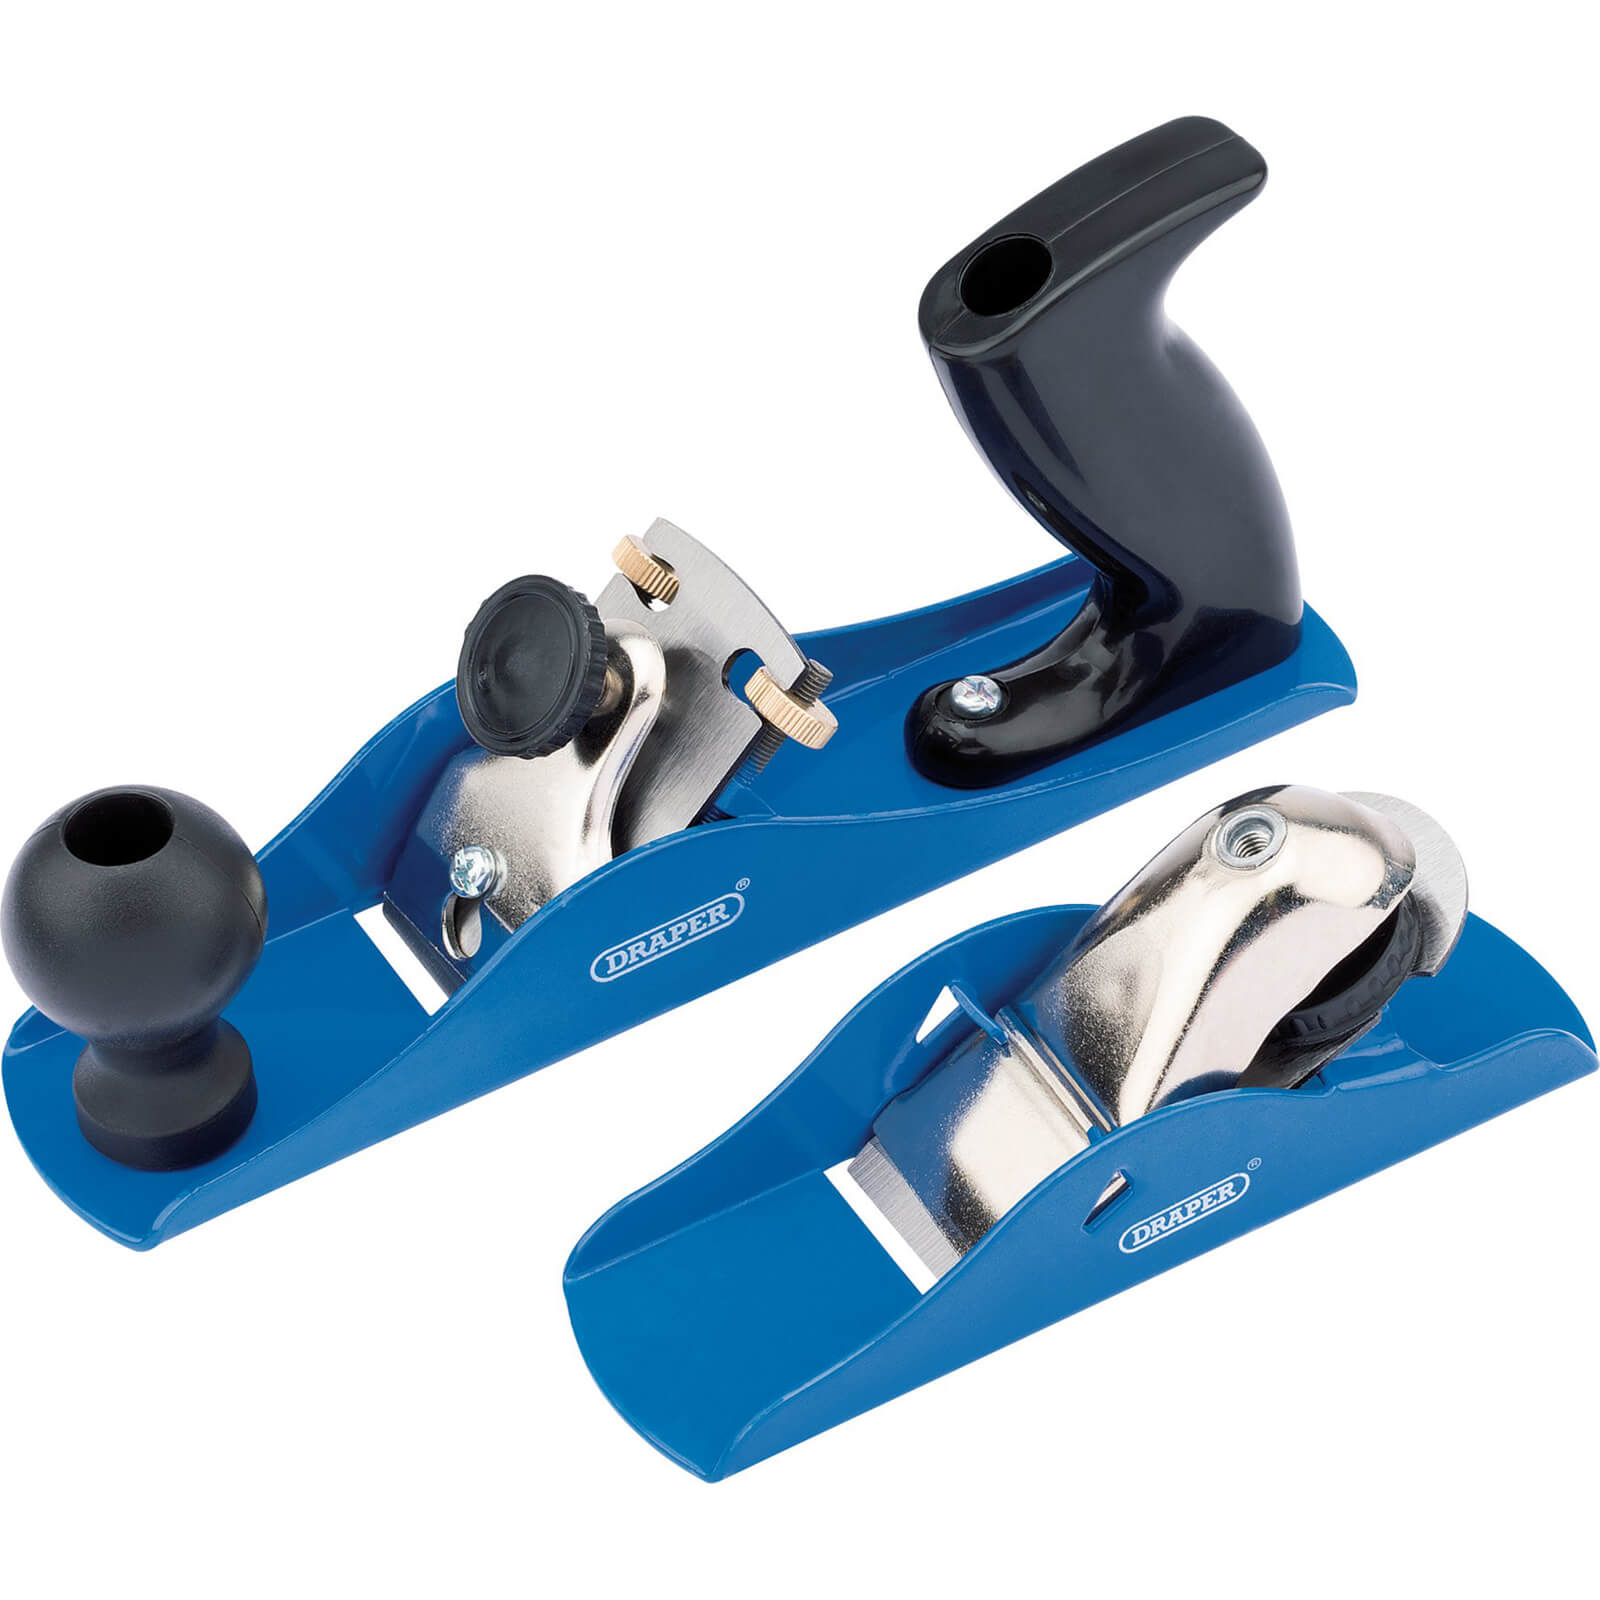 Image of Draper 2 Piece Block and Smoothing Plane Set